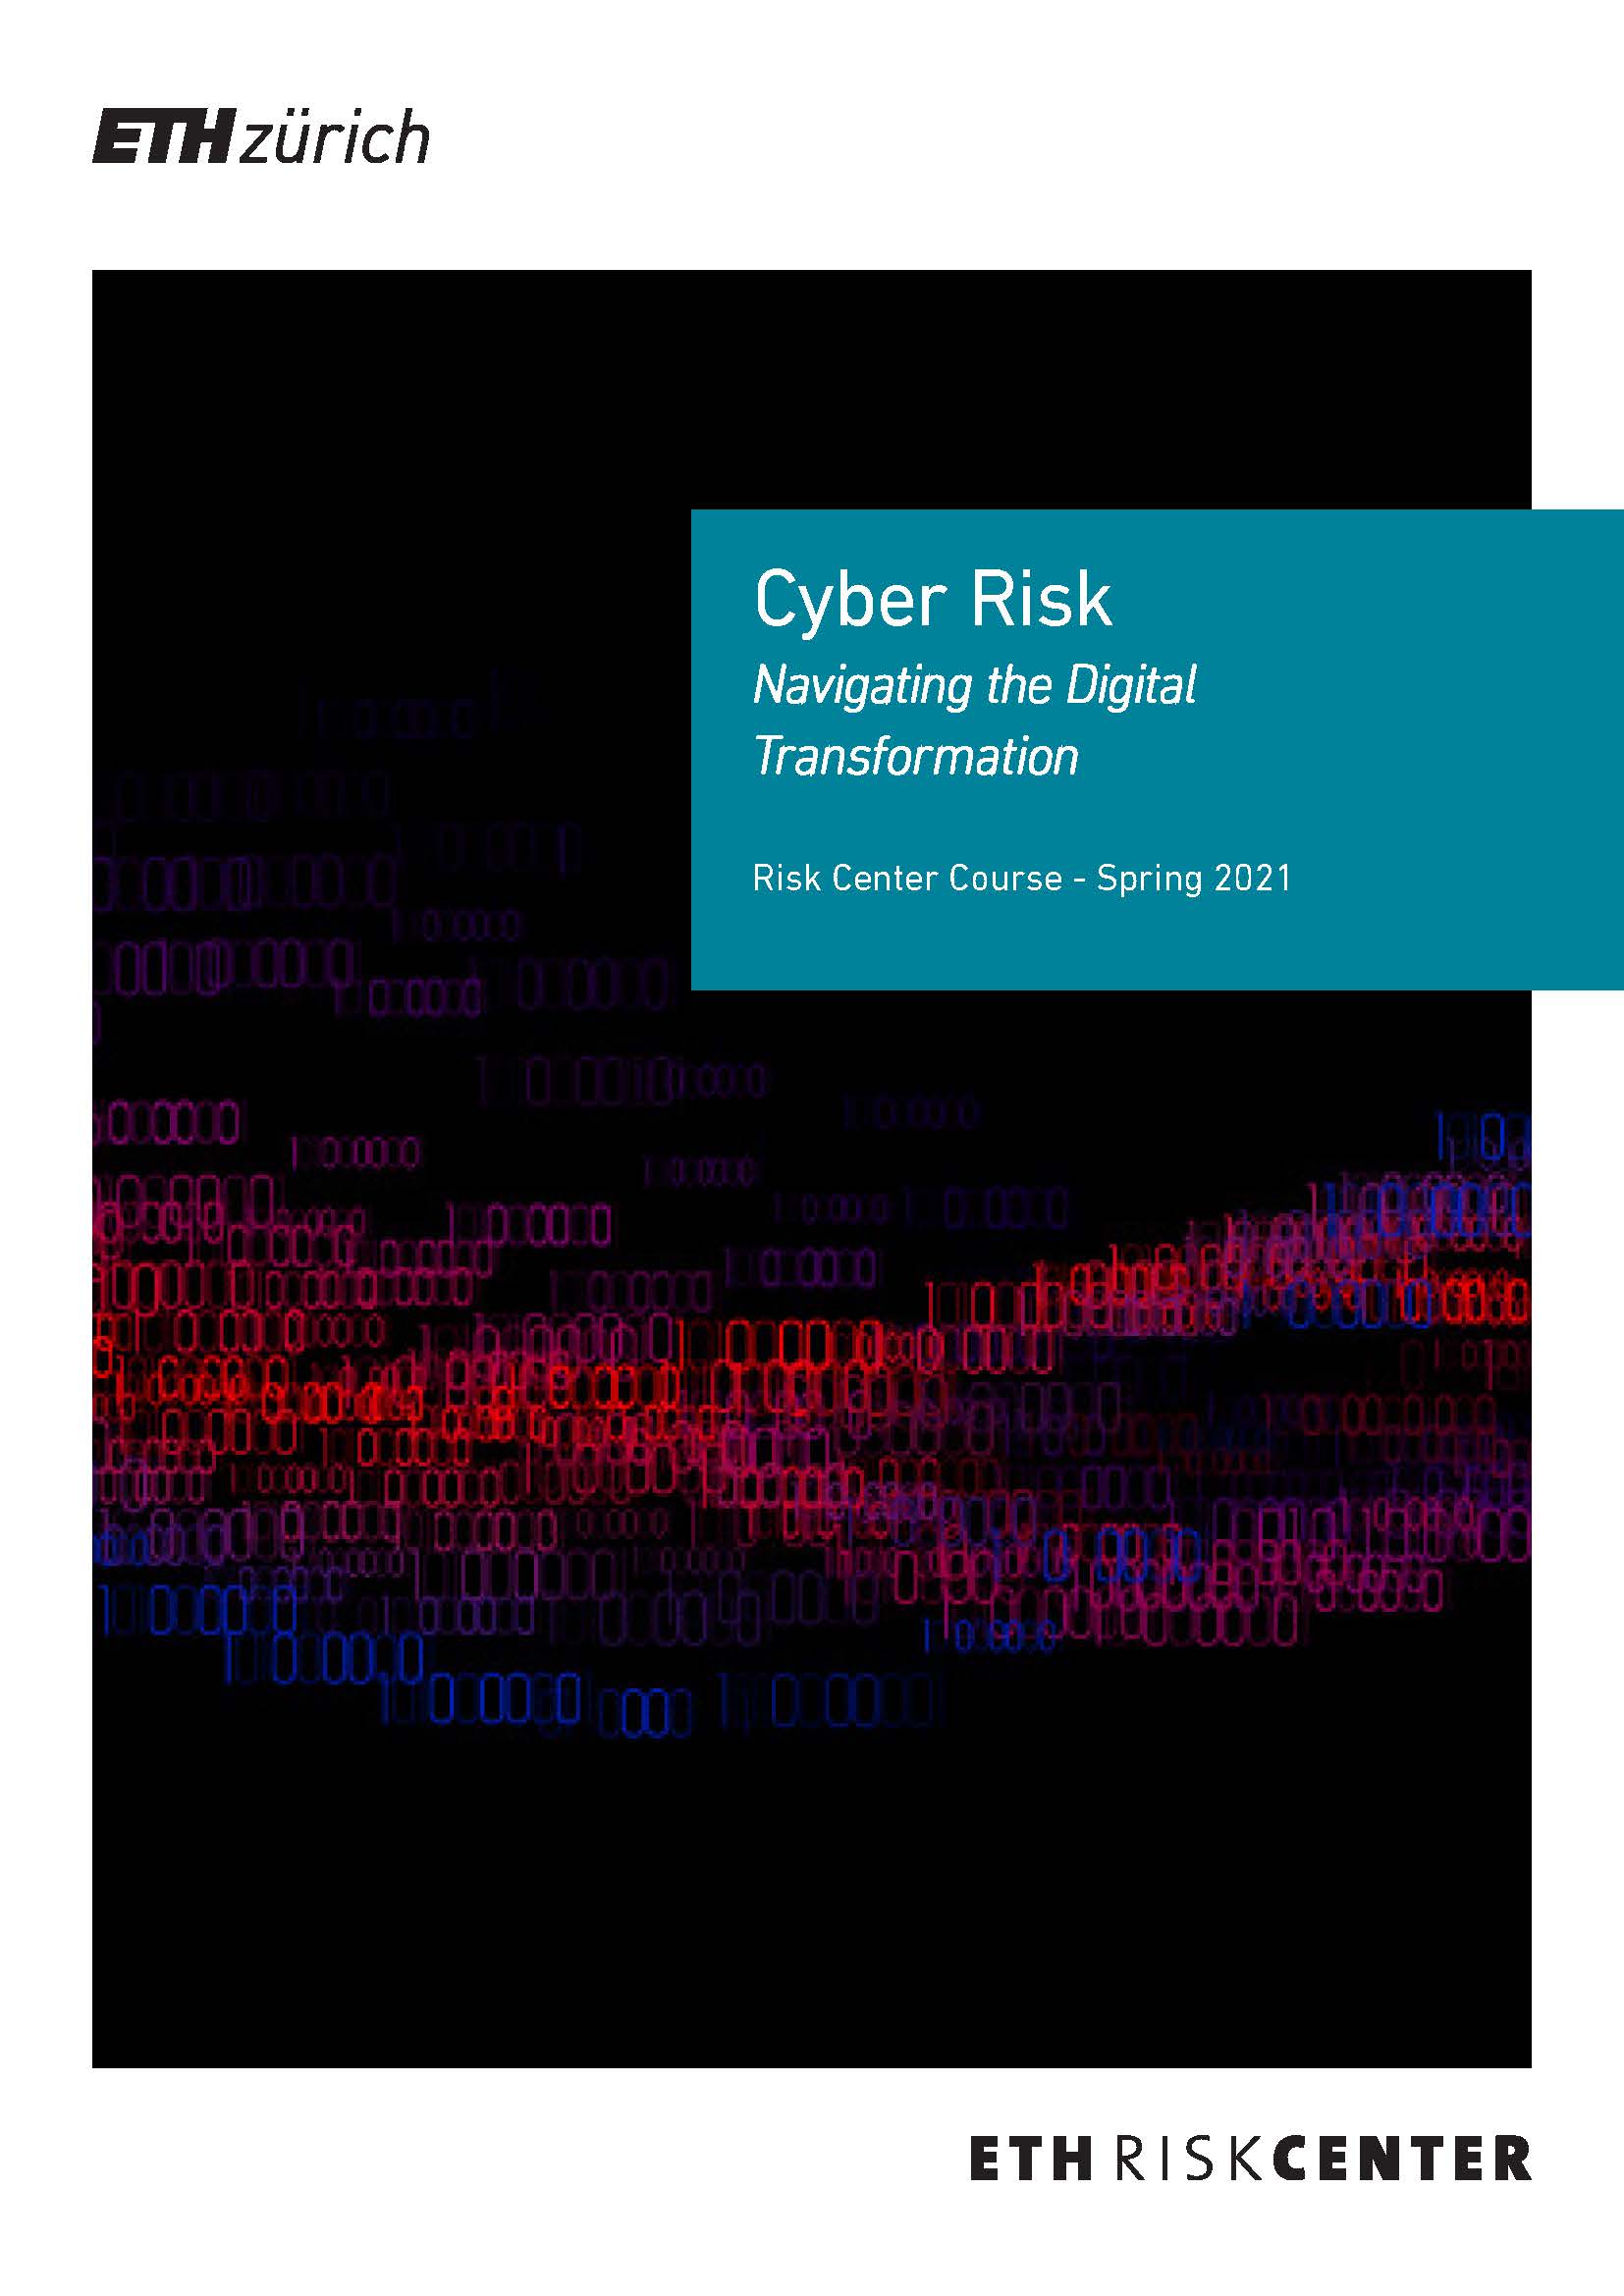 Read more about the Cyber Risks Course 2021.